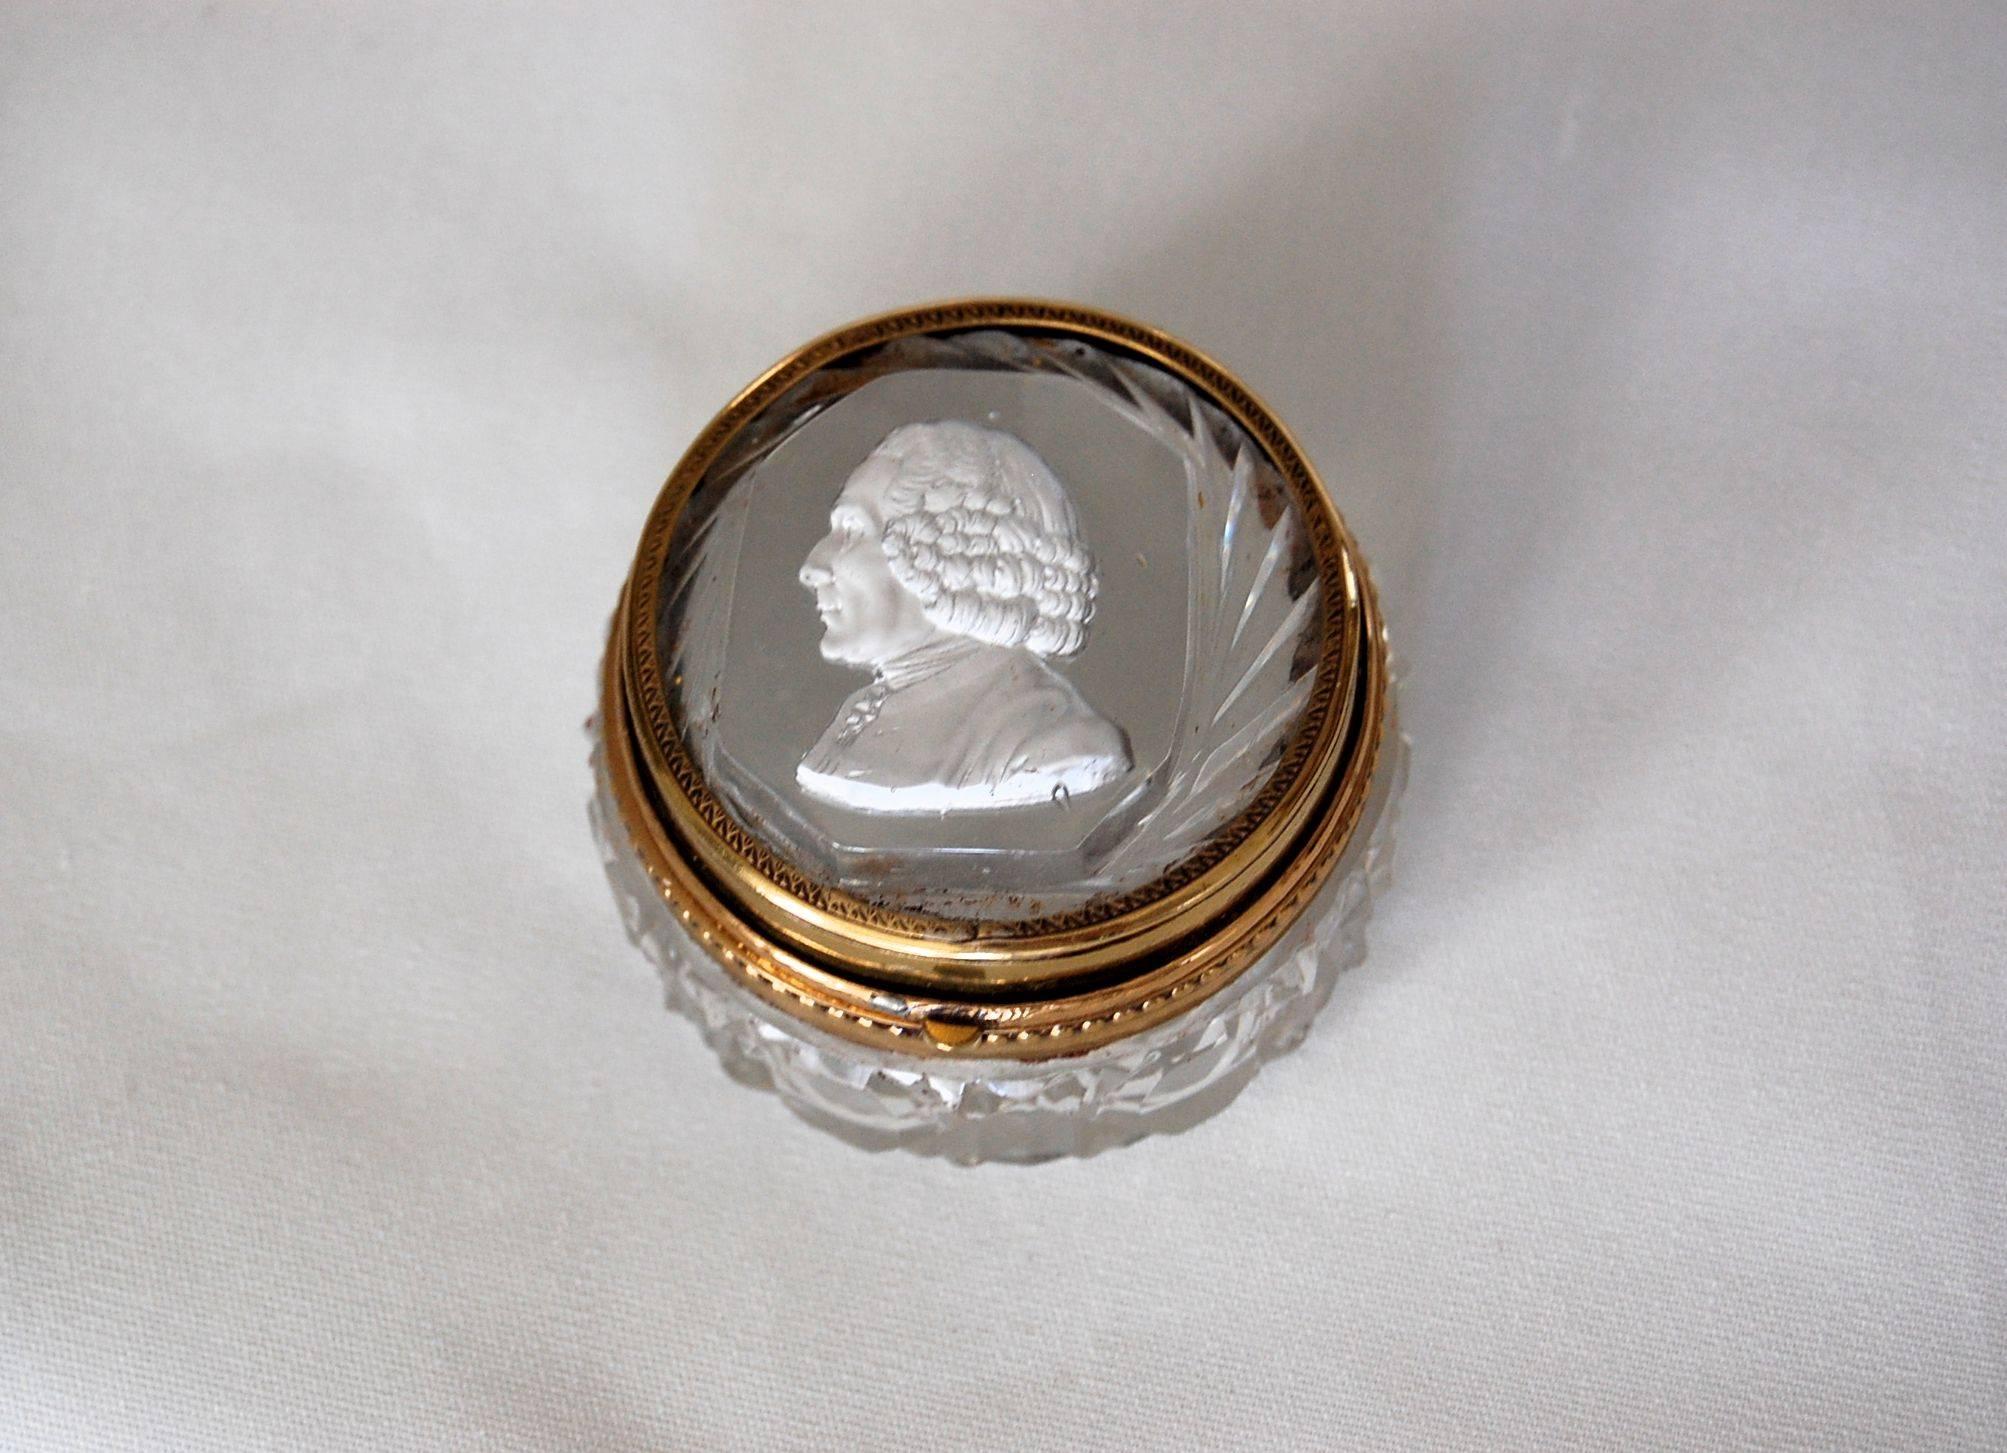 Wonderful vanity cut crystal box with metal hinge and decoration, sulfide bust of a gentleman, excellent condition.